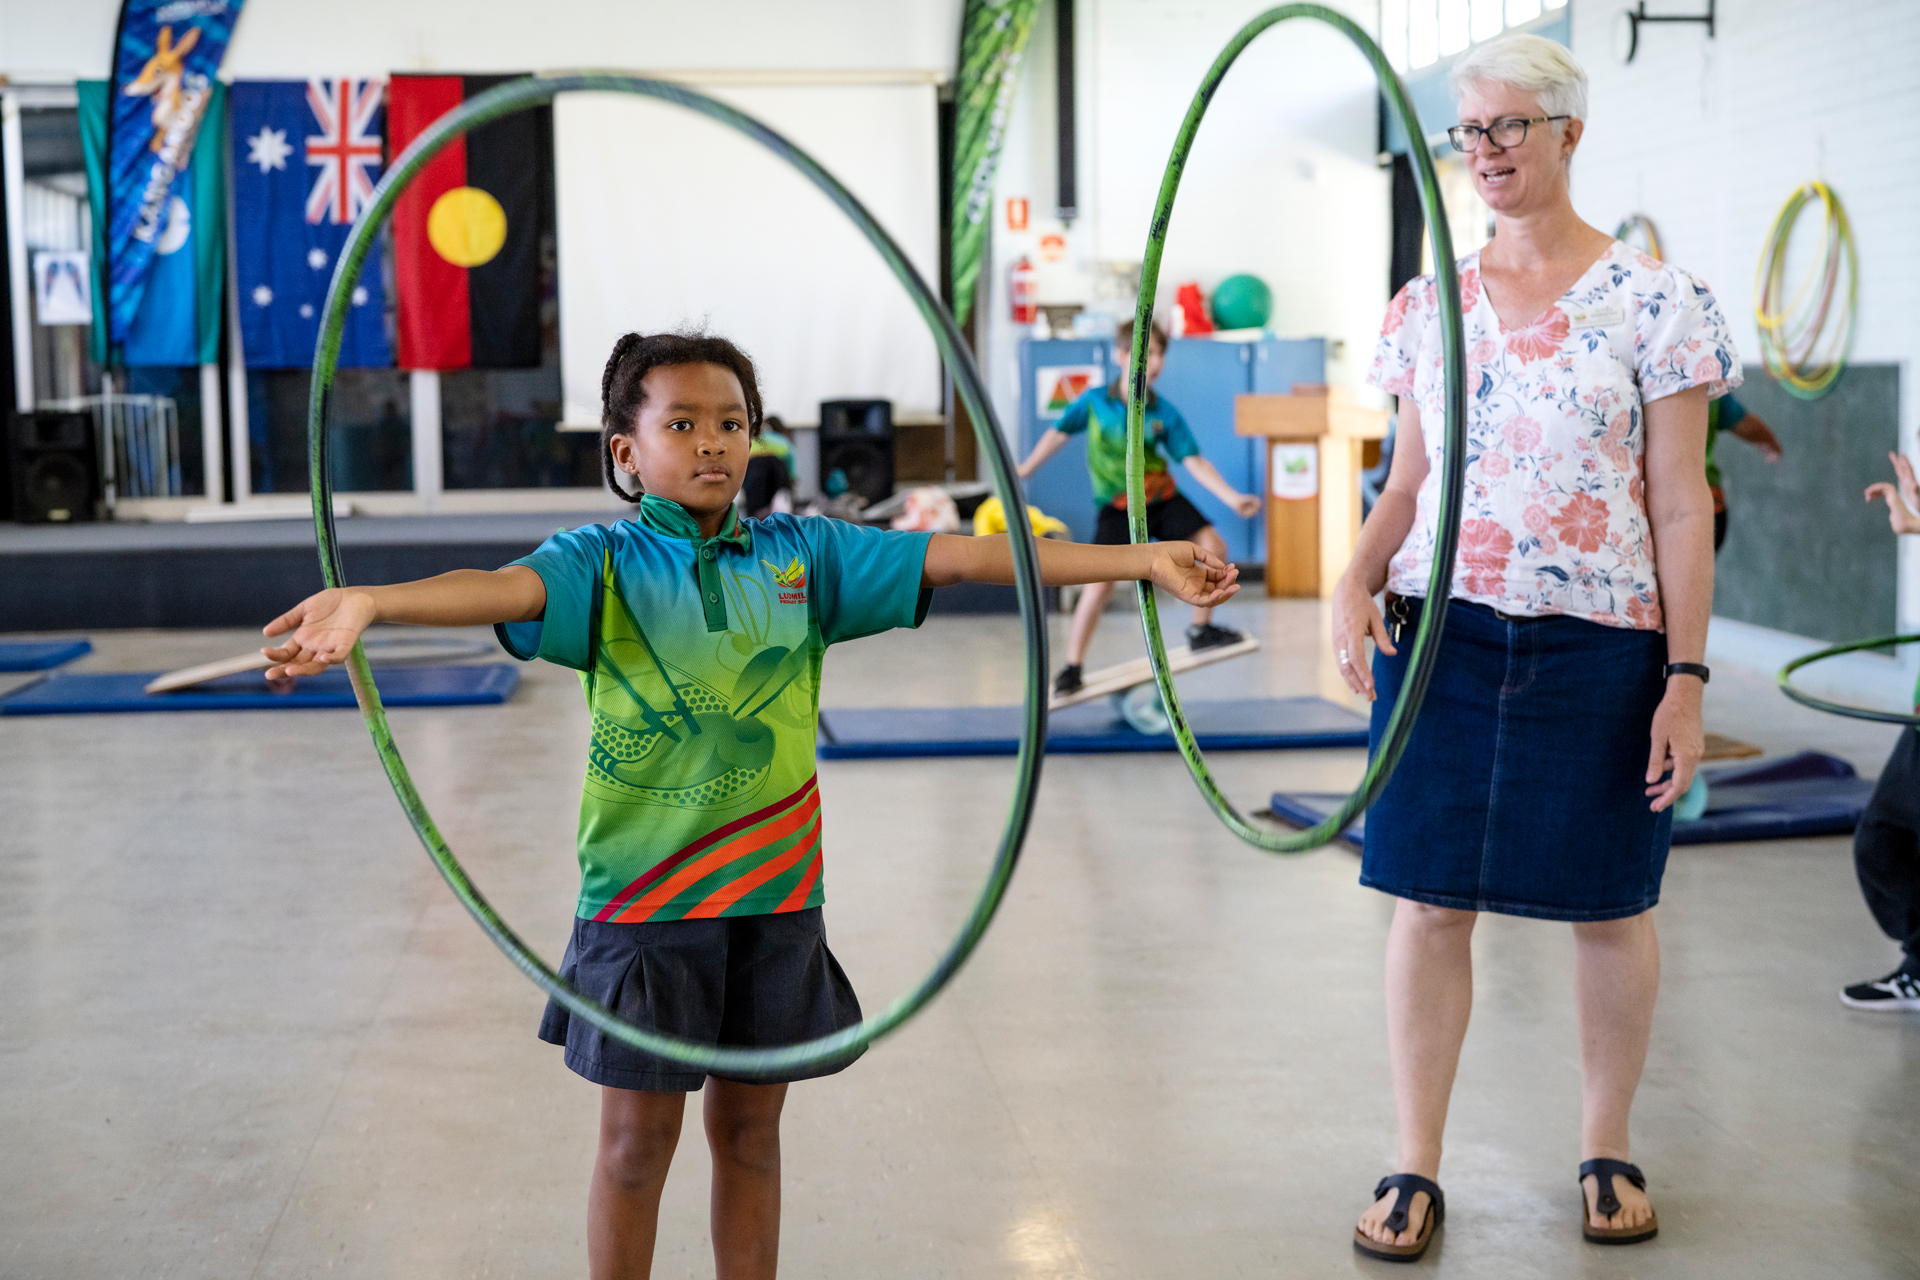 A child playing with hula-hoops, with an educator looking on 